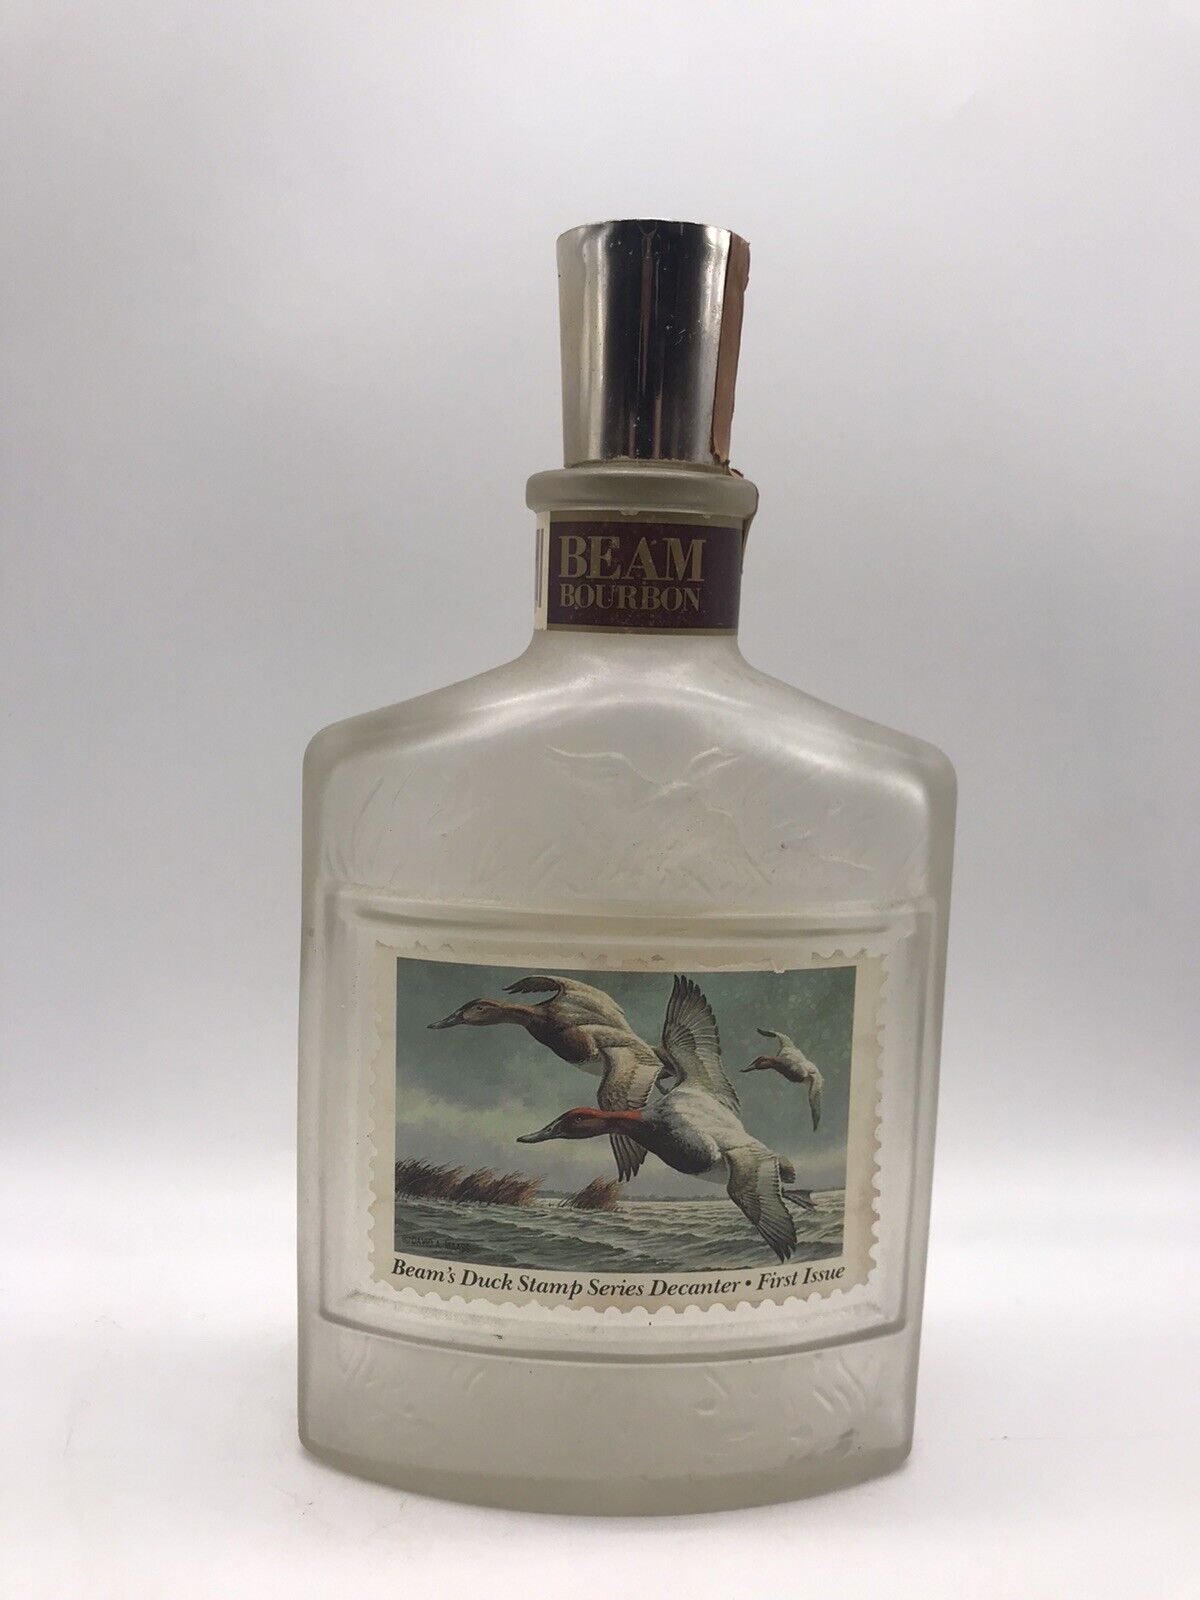 Vintage Jim Beam\'s Duck Stamp Series Decanter - First Issue - Canvasbacks- EMPTY